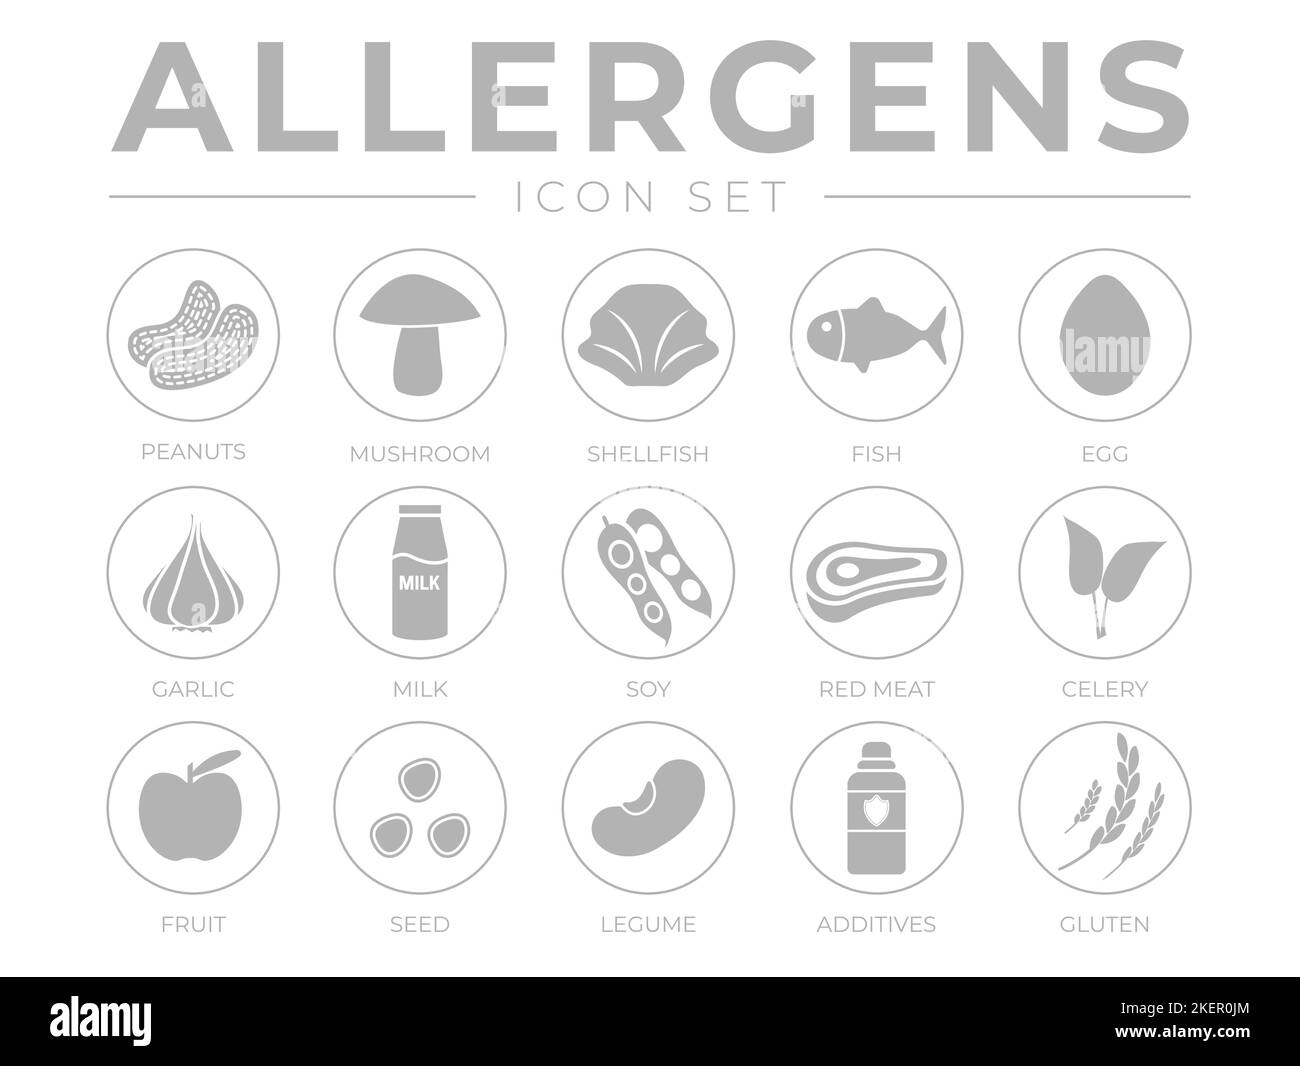 Simple Allergens Icon Set. Peanuts, Mushroom, Shellfish, Fish, Egg, Garlic, Milk, Soy Red Meat, Celery, Fruit, Seed, Legume and Additives Gluten Aller Stock Vector